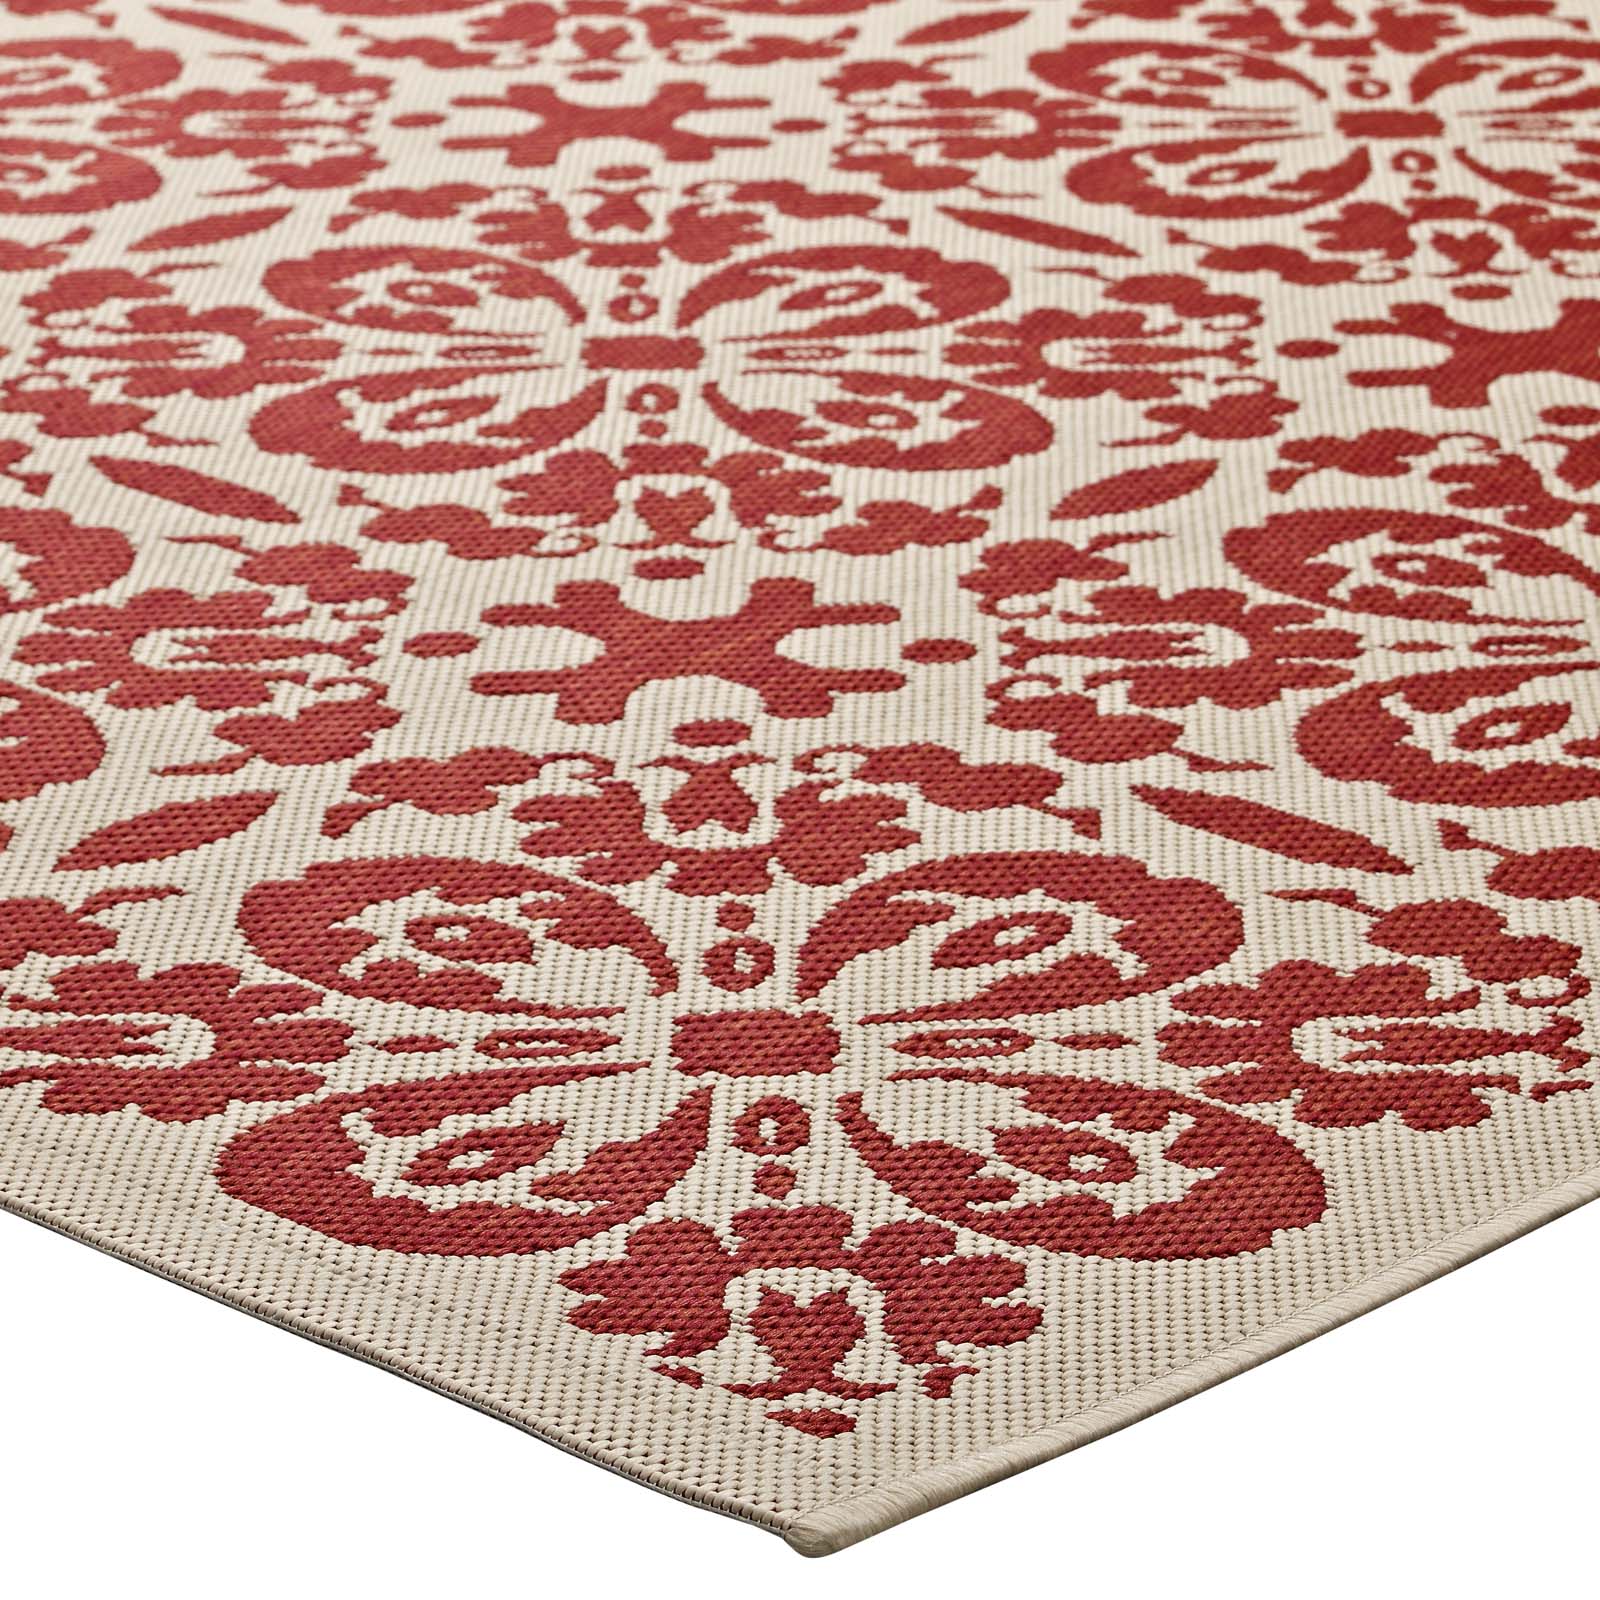 Modway Outdoor Rugs - Ariana Vintage Floral Trellis 5x8 Indoor and Outdoor Area Rug Red & Beige